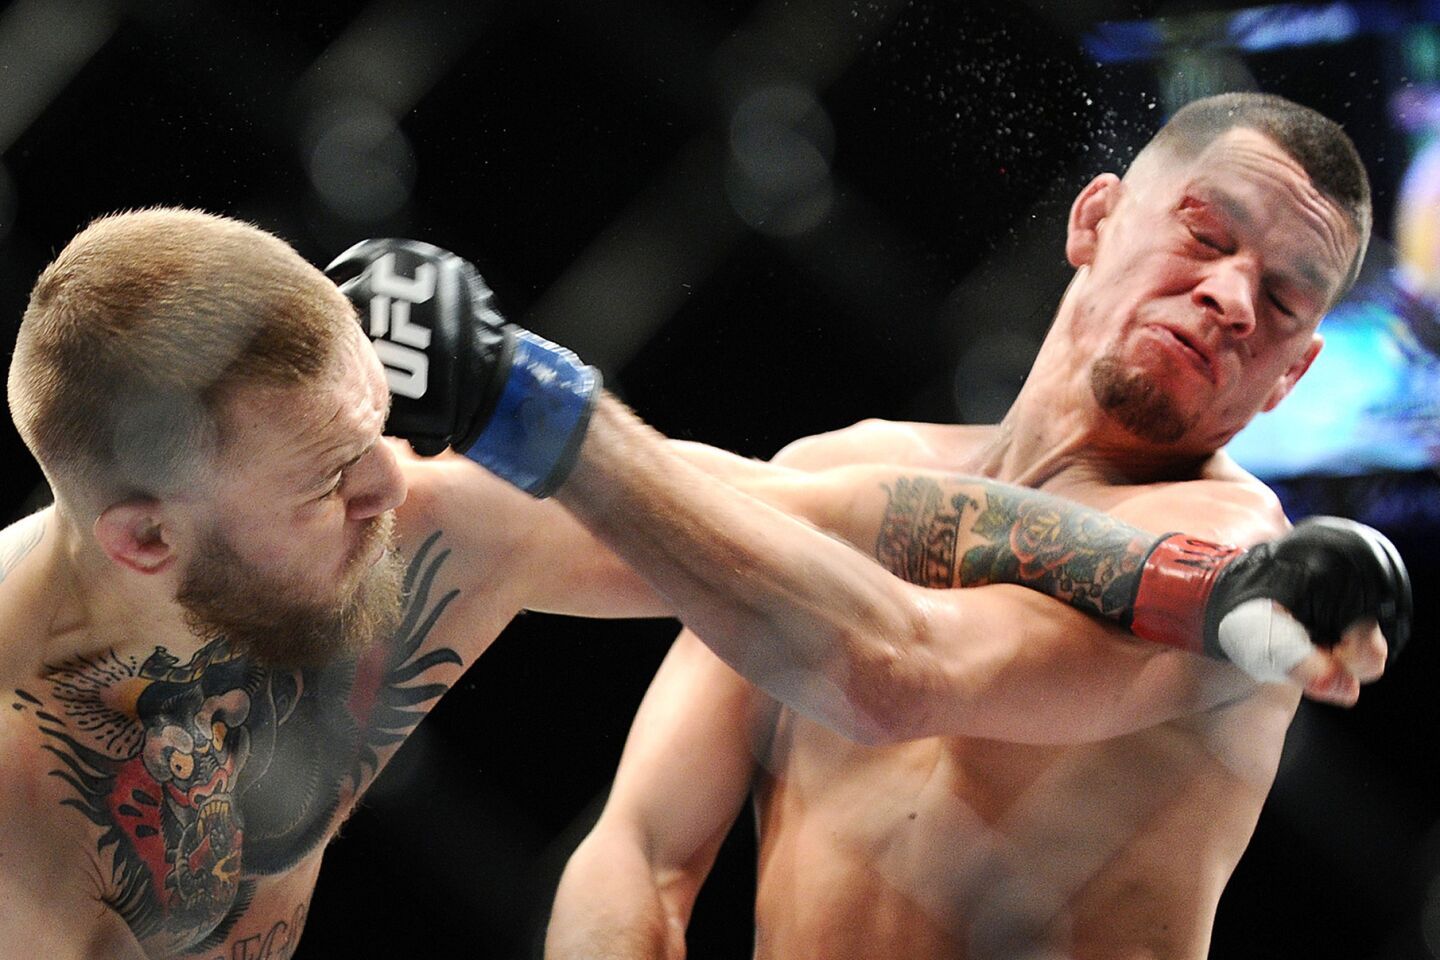 Conor McGregor, left, and Nate Diaz exchange punches during their welterweight fight at UFC 196 on March 5.